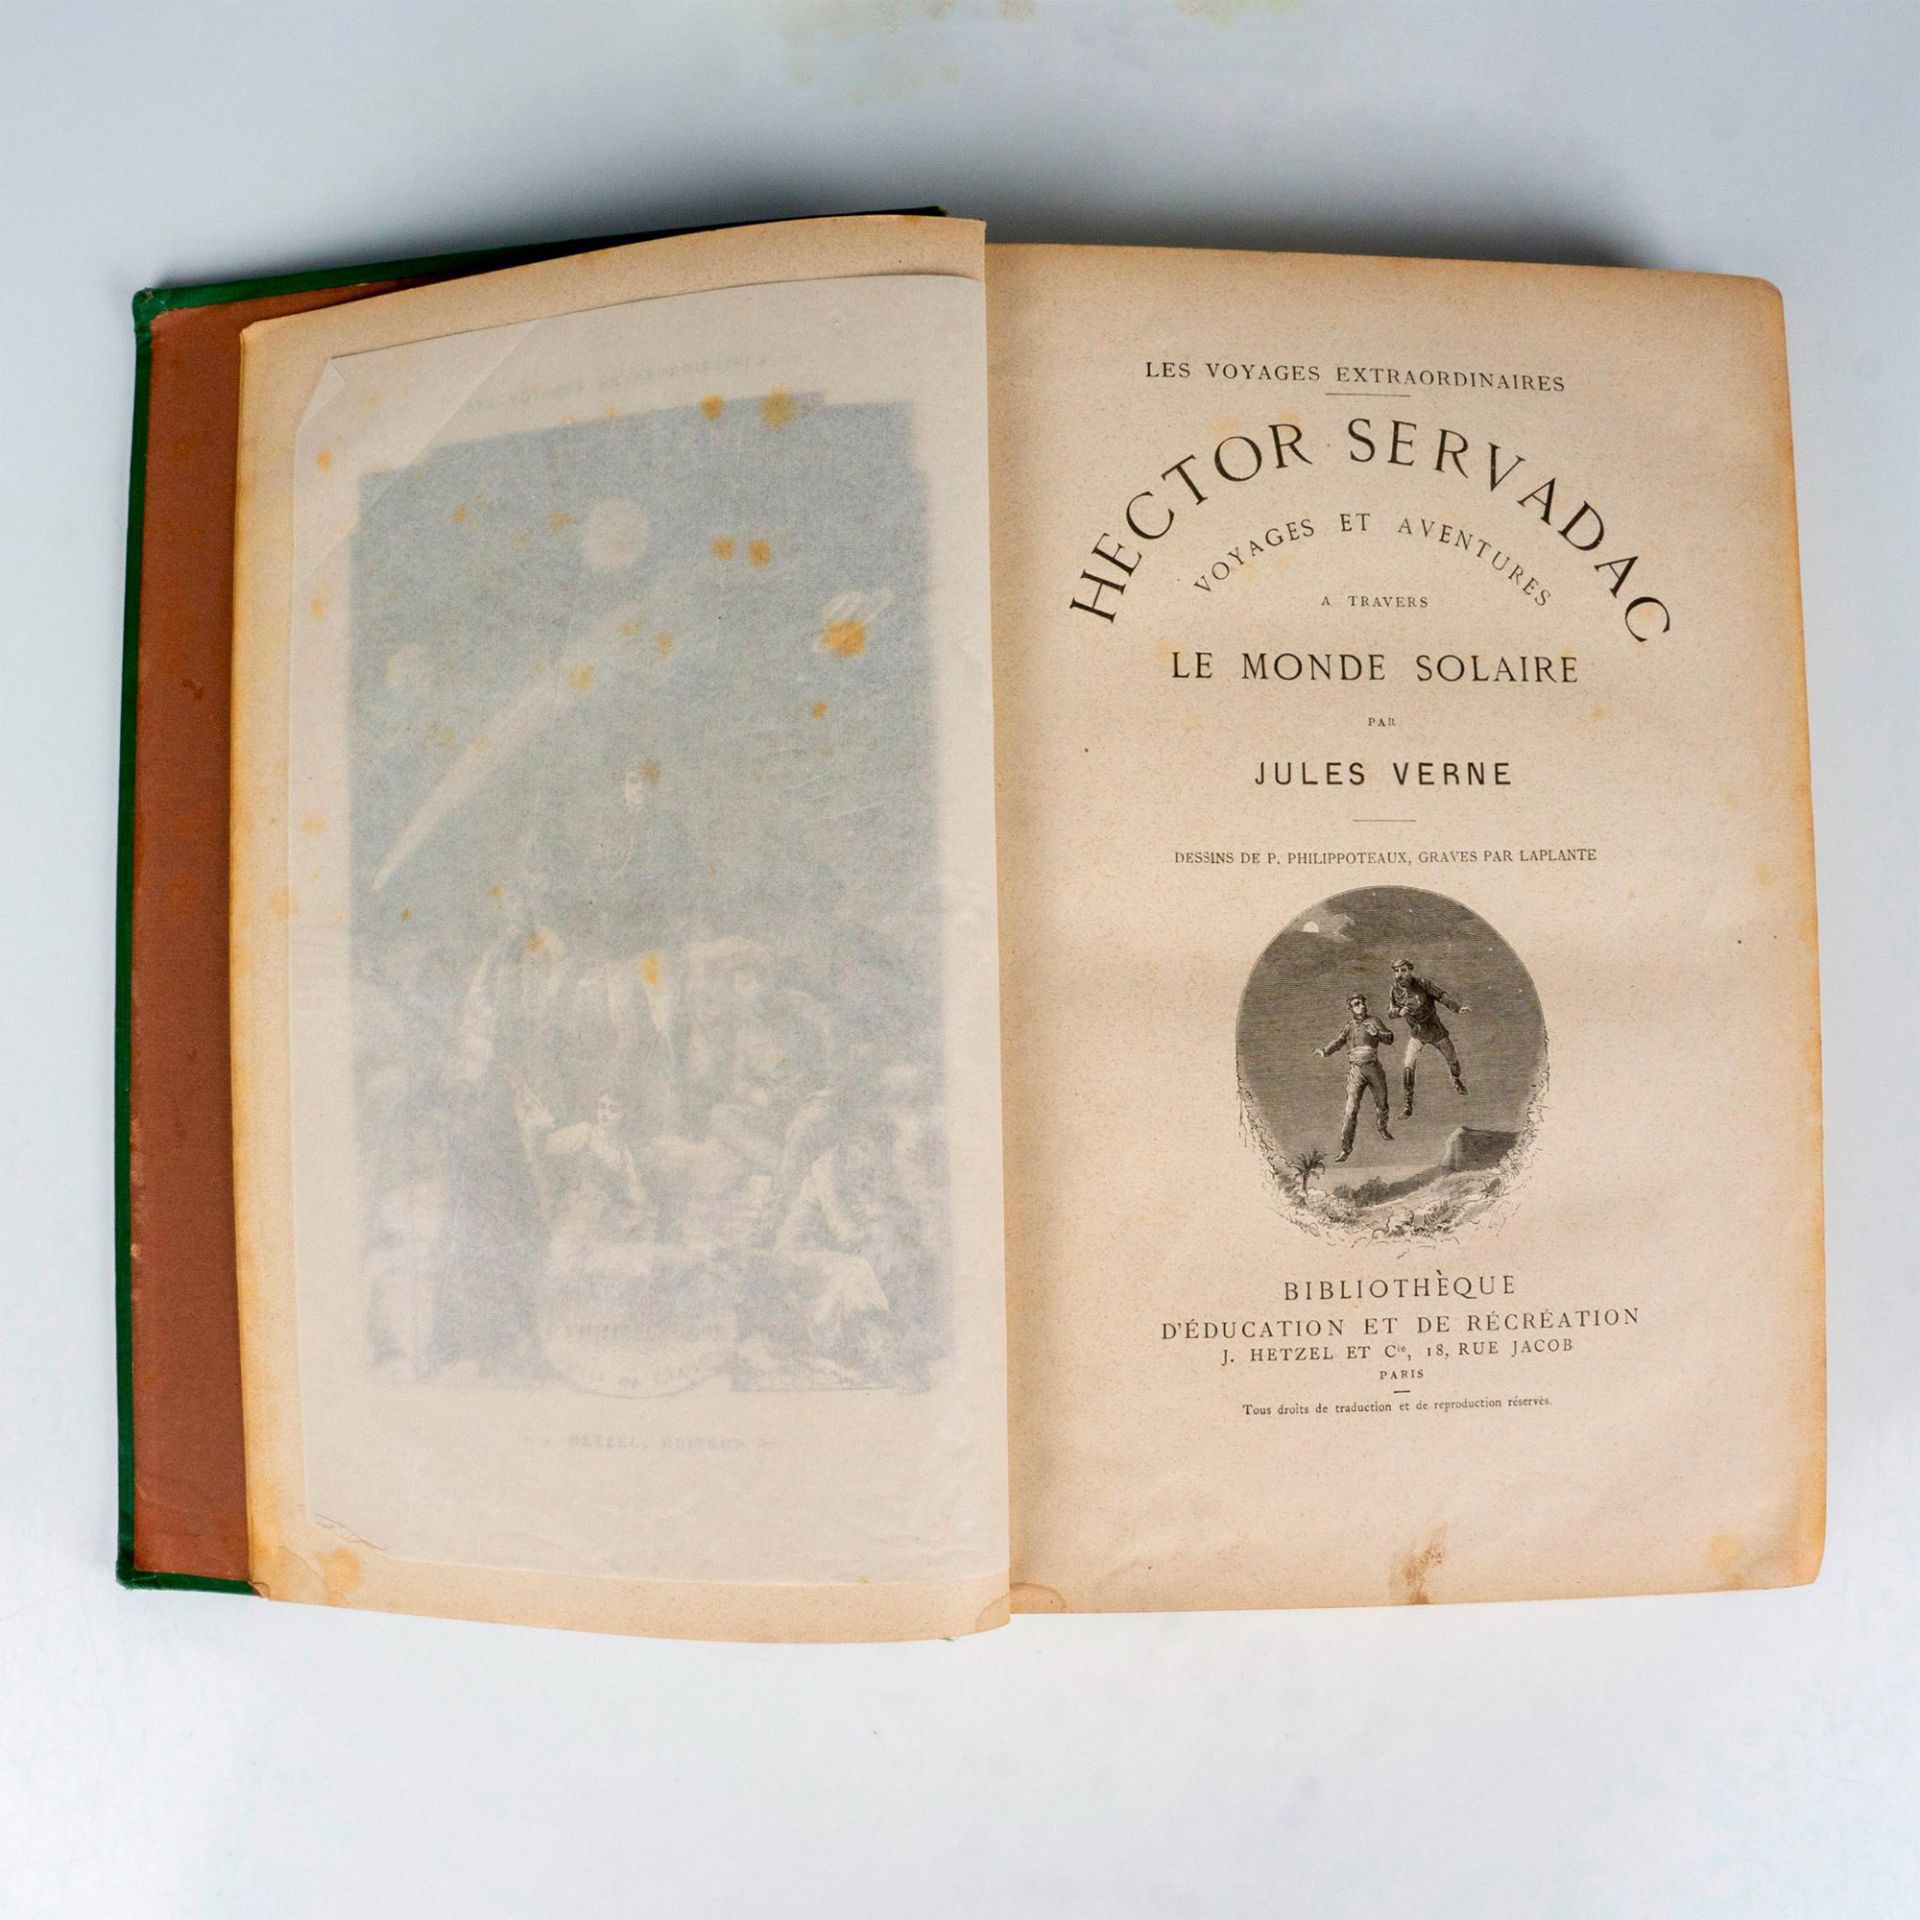 Jules Verne, Hector Servadac, Au Monde Solaire, Green - Image 4 of 4